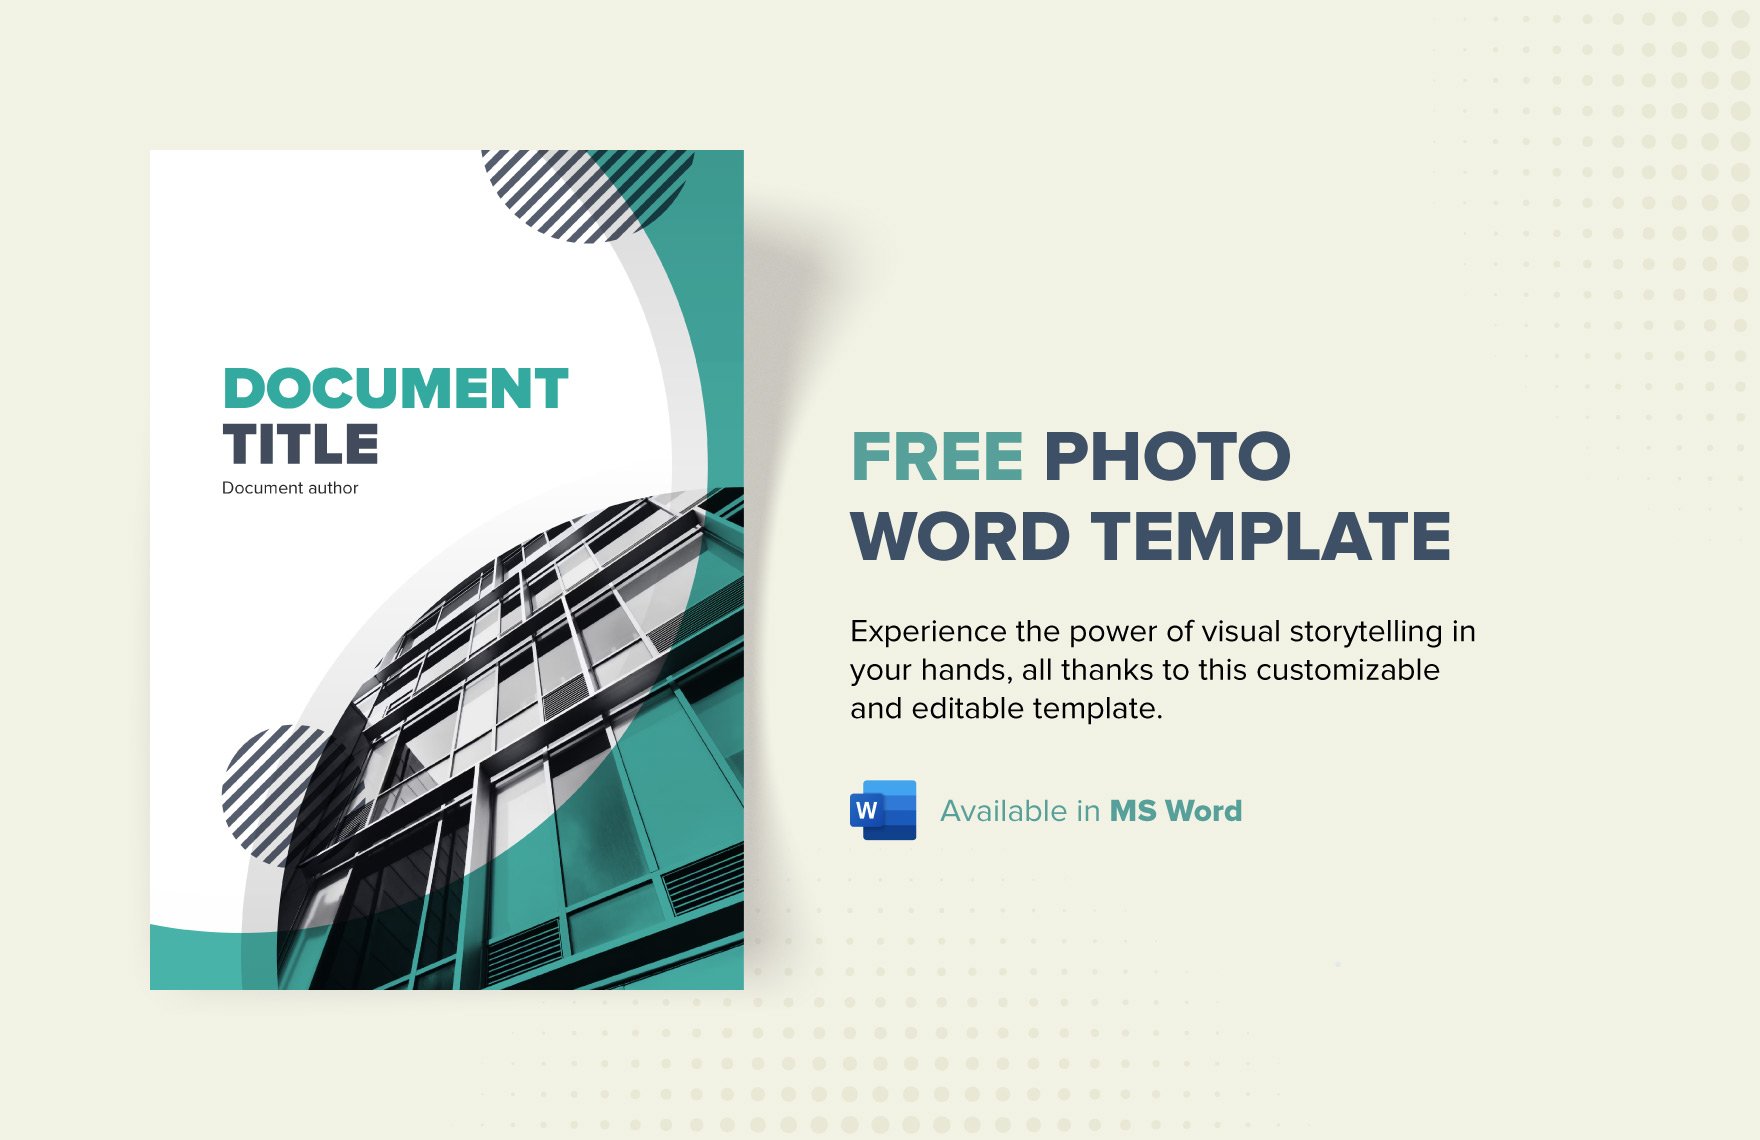 Photo Word Template in Word